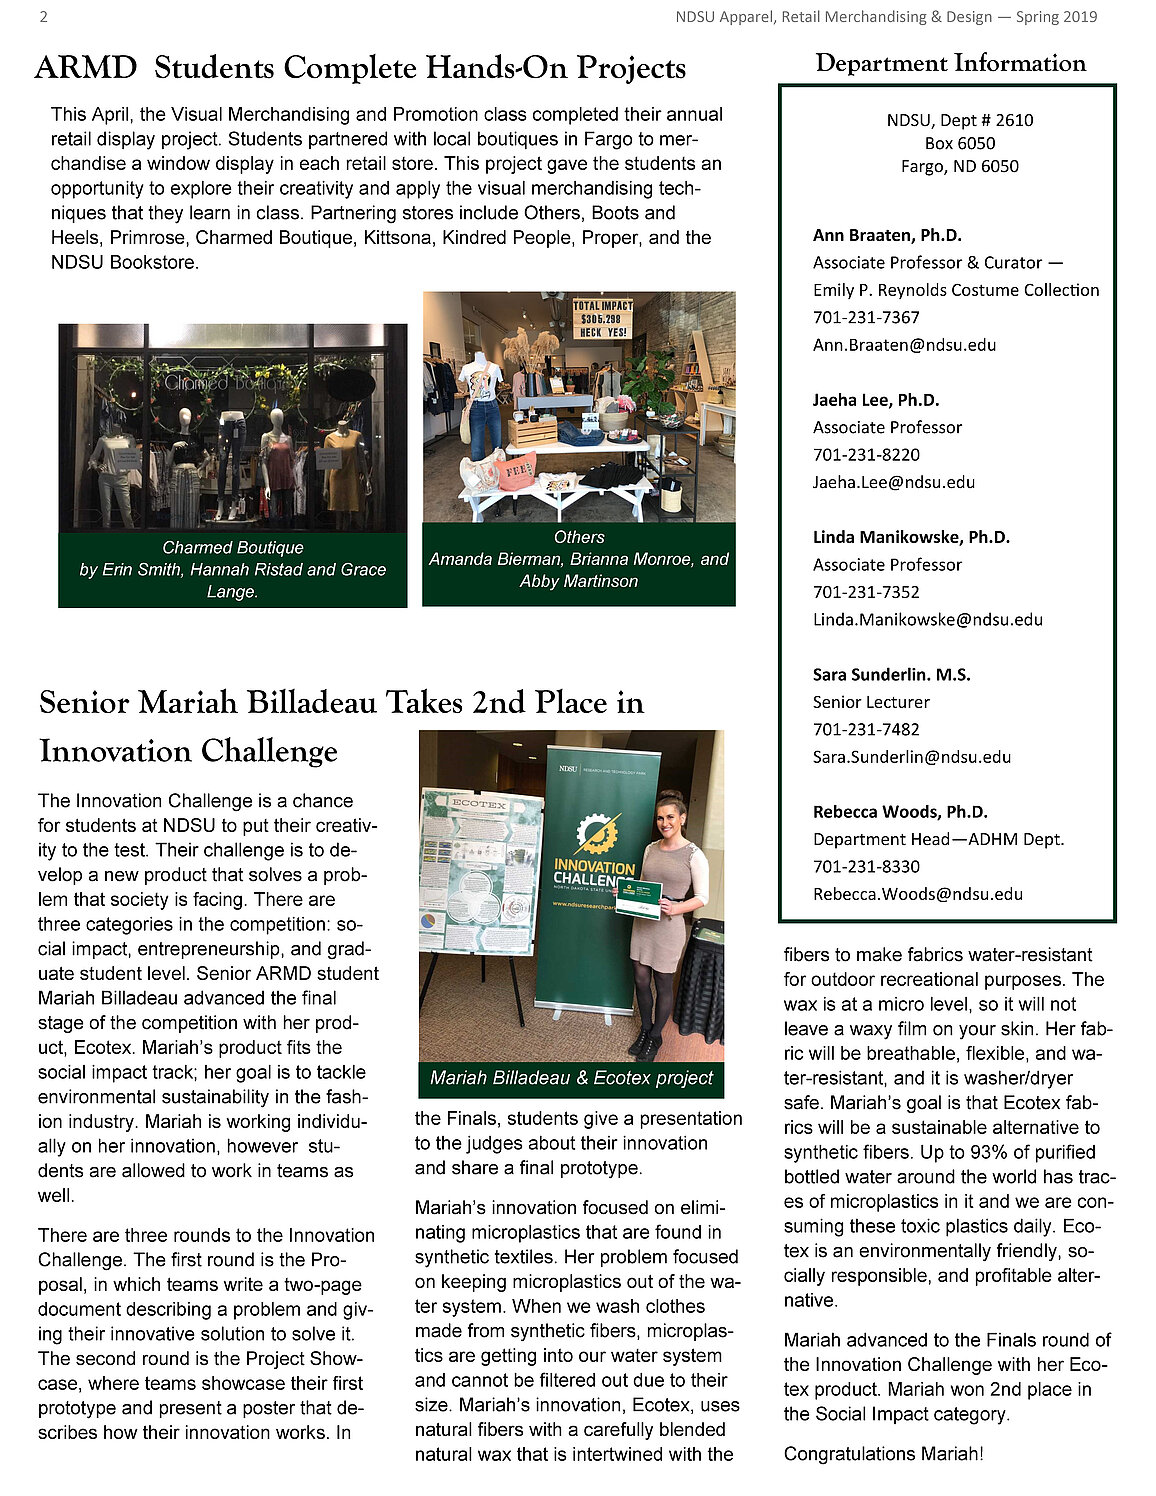 Page two of newsletter